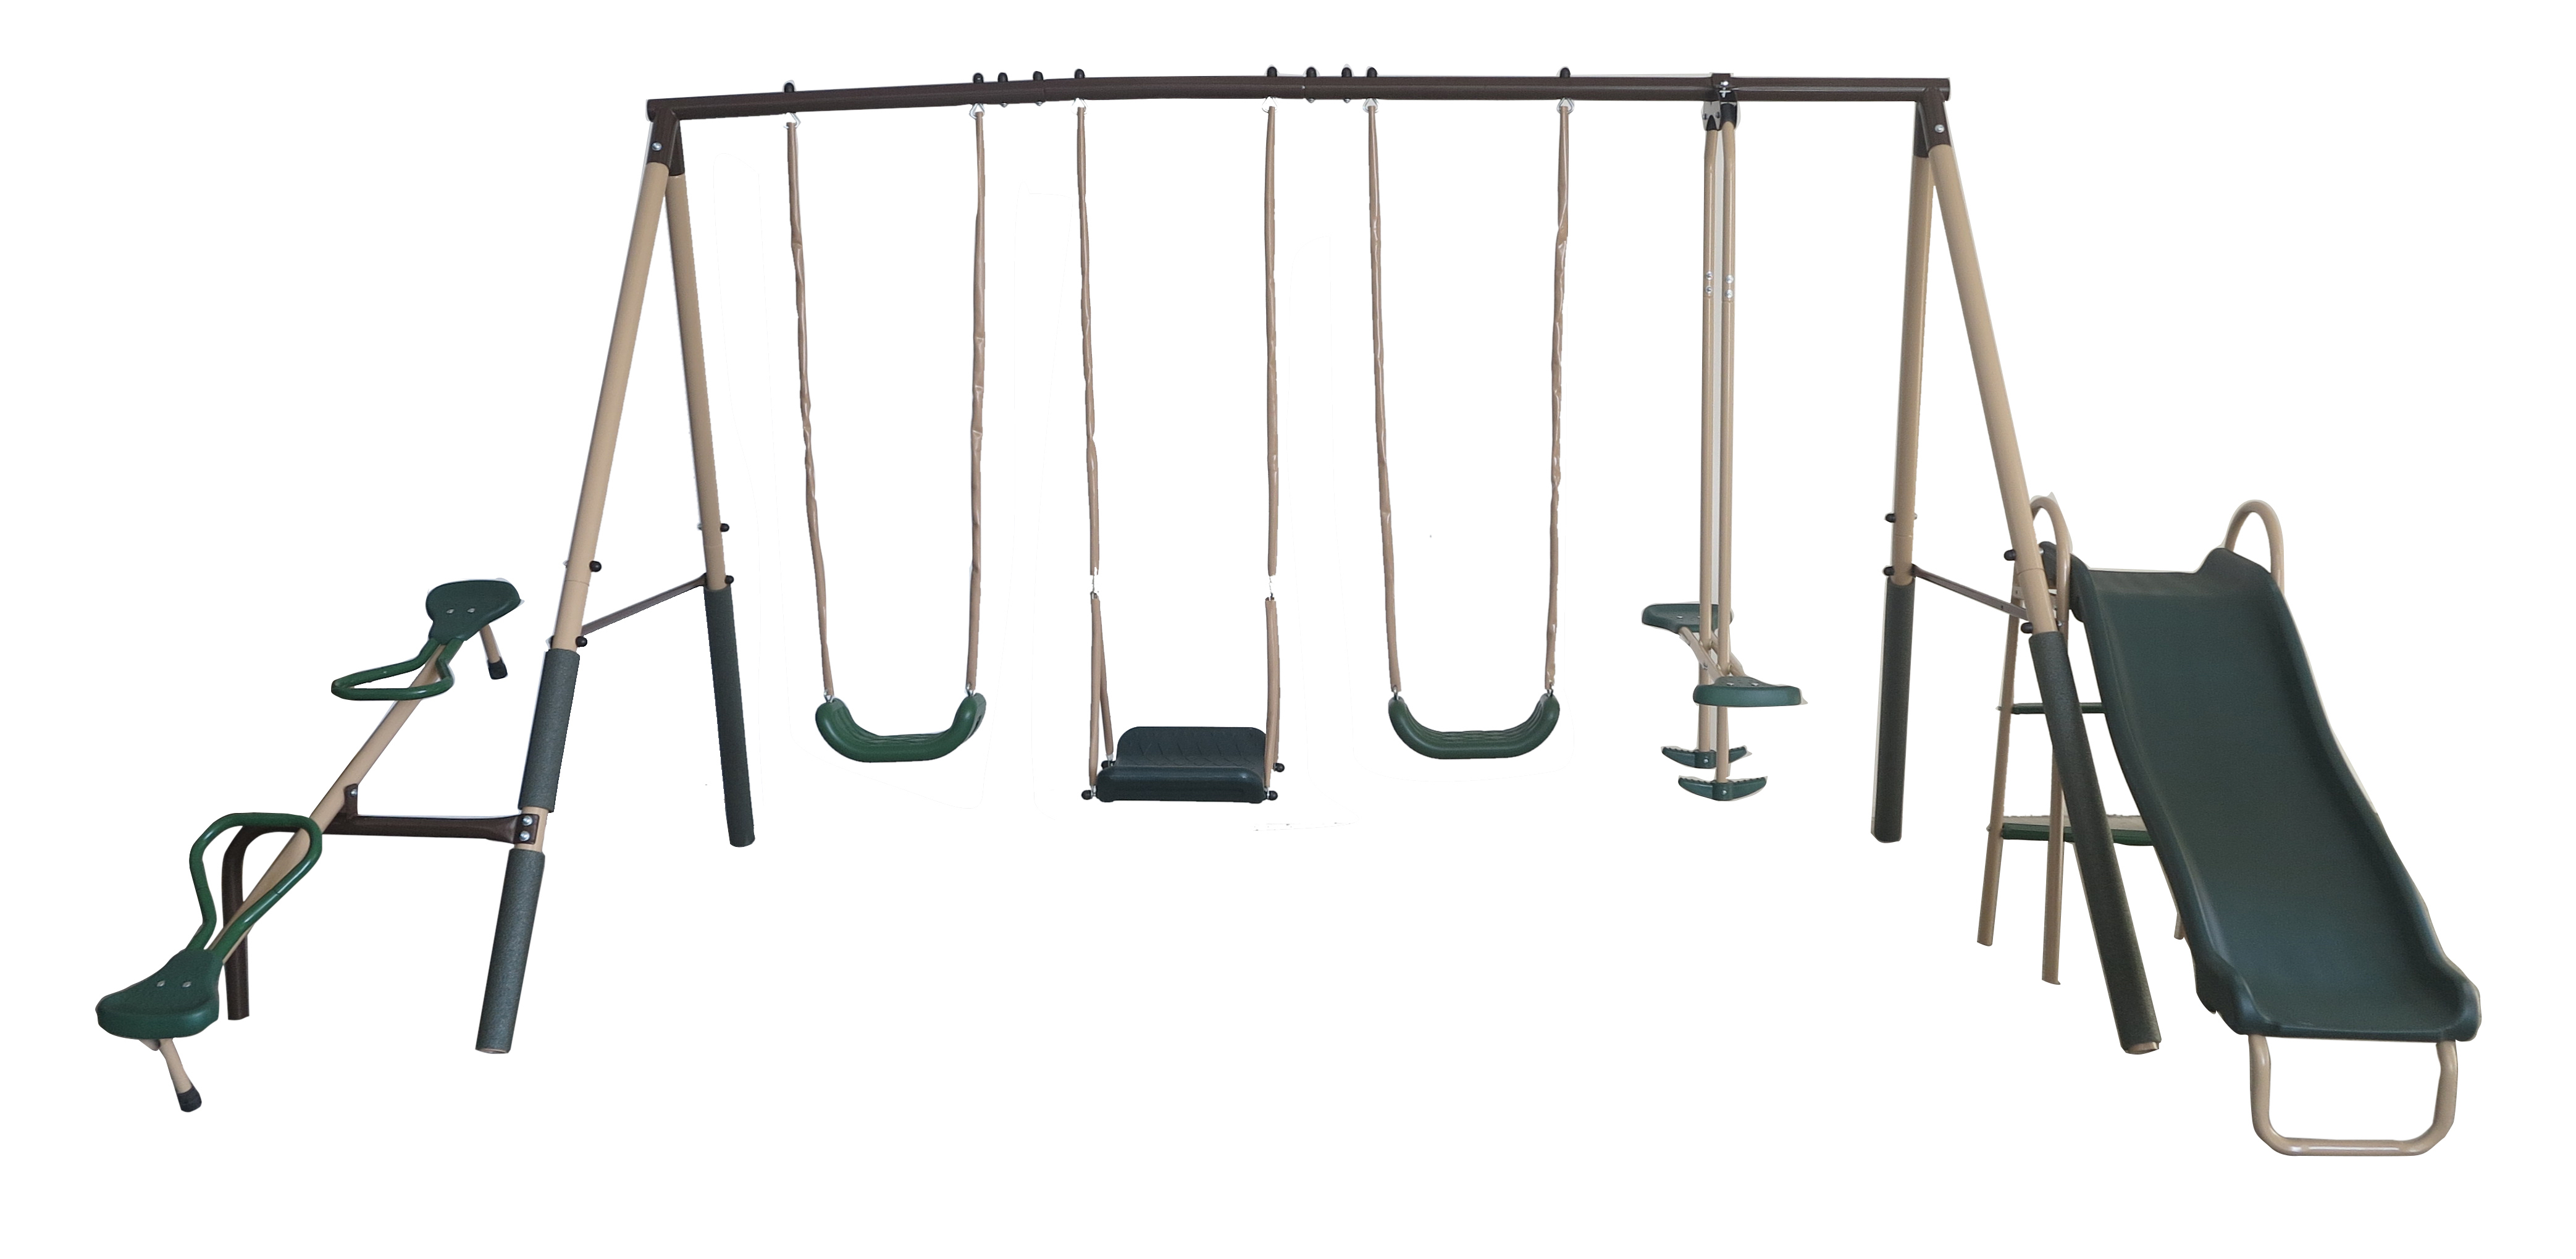 Crestview Swing Set by XDP Recreation with 2 Swing Seats, Stand R Swing, Wave Slide, Fun Glider, & See Saw - image 2 of 7